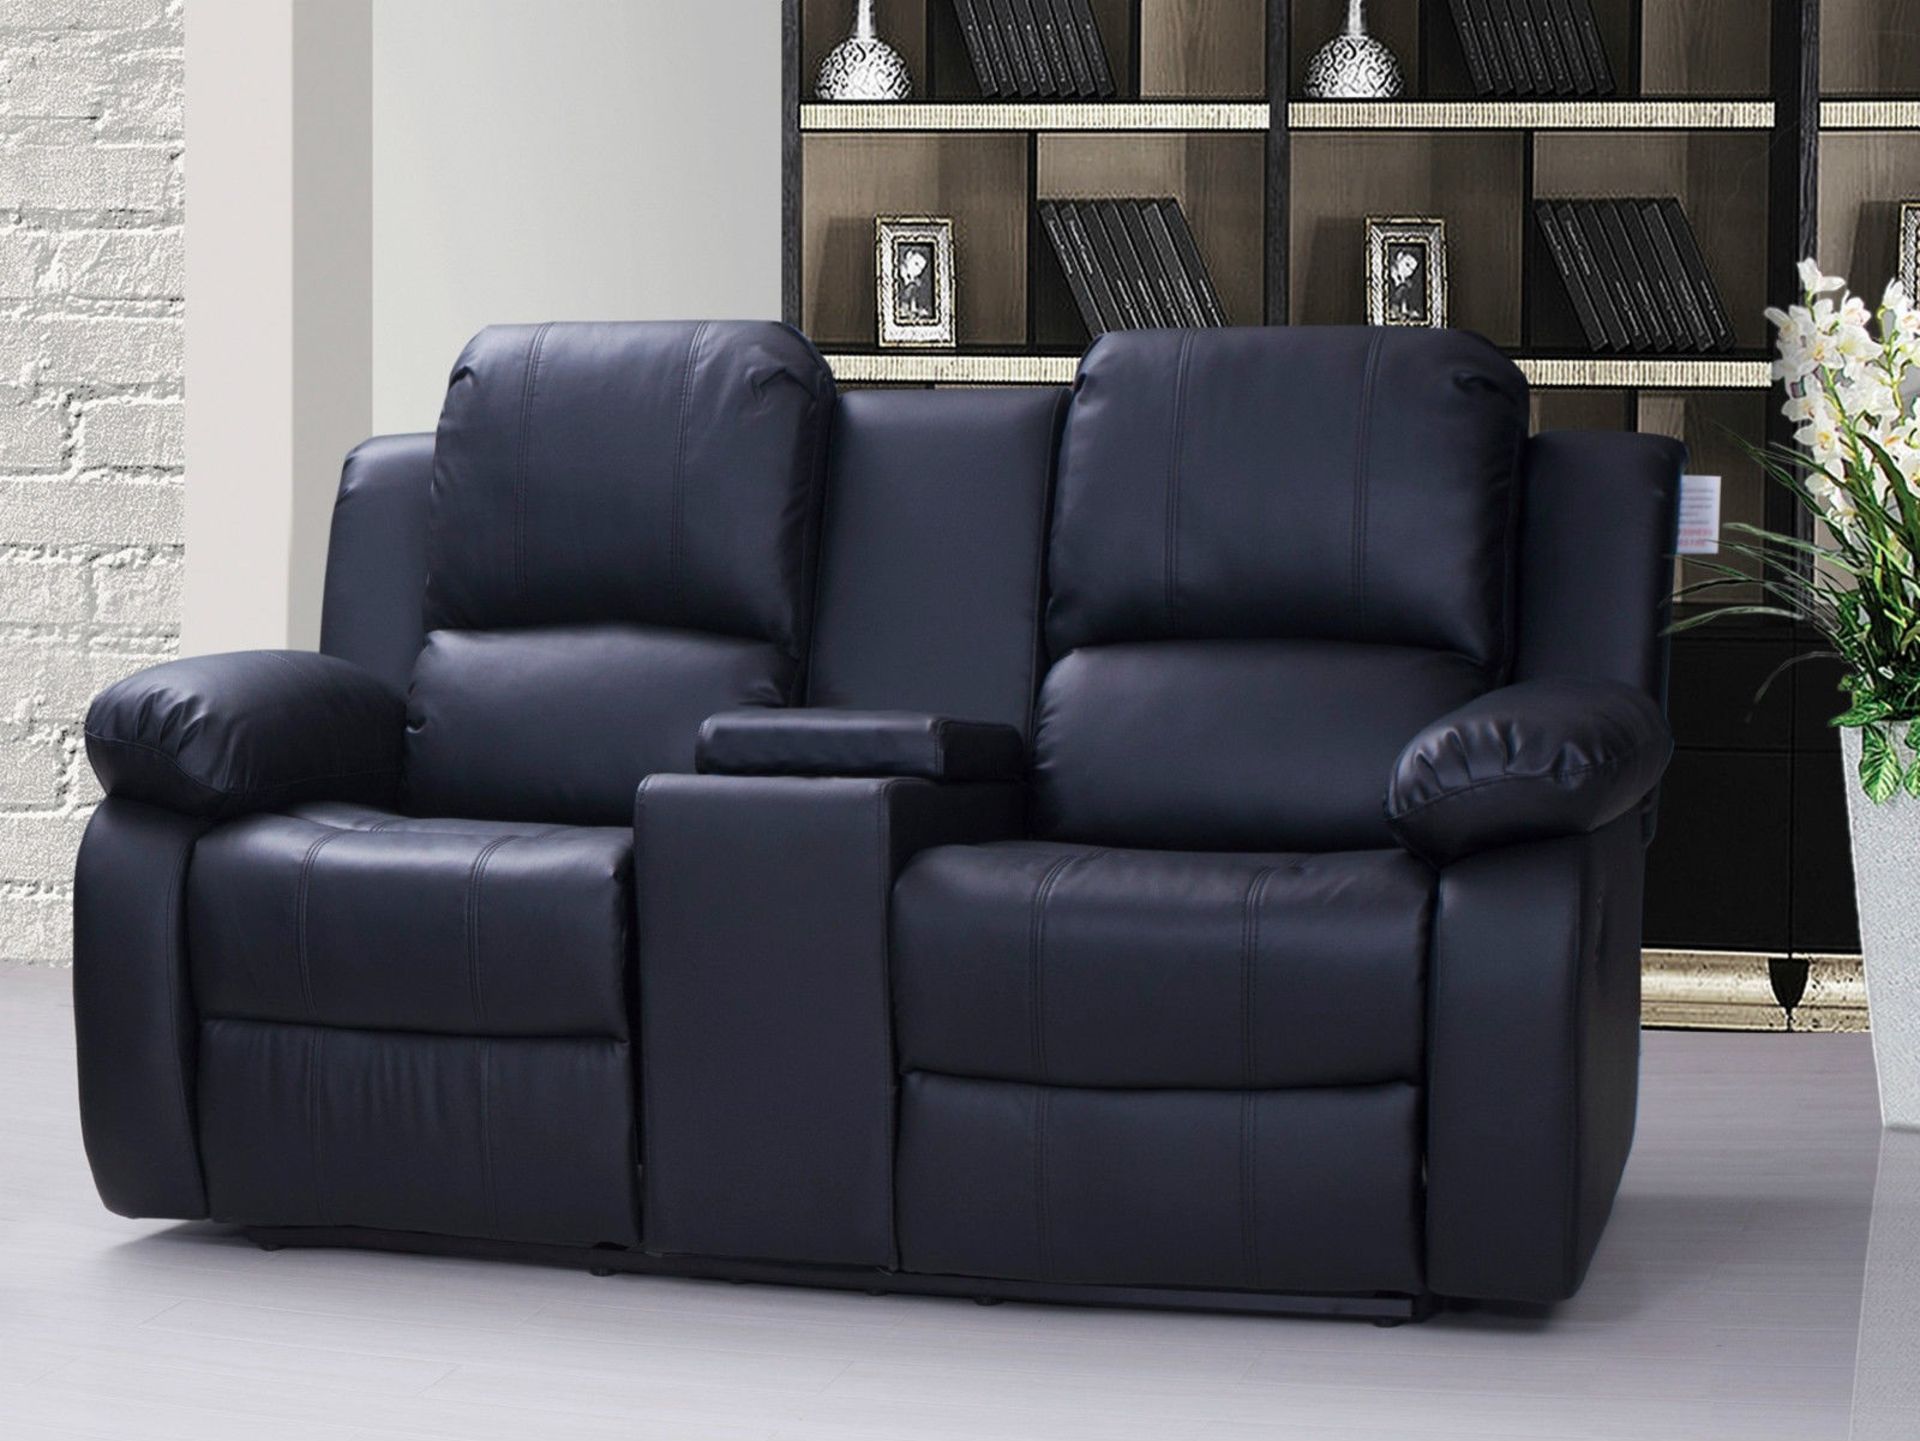 Brand New 2 Seater Manhattan Manual Reclining Sofa With Console And Drinks Holder In Black Leather - Image 2 of 2